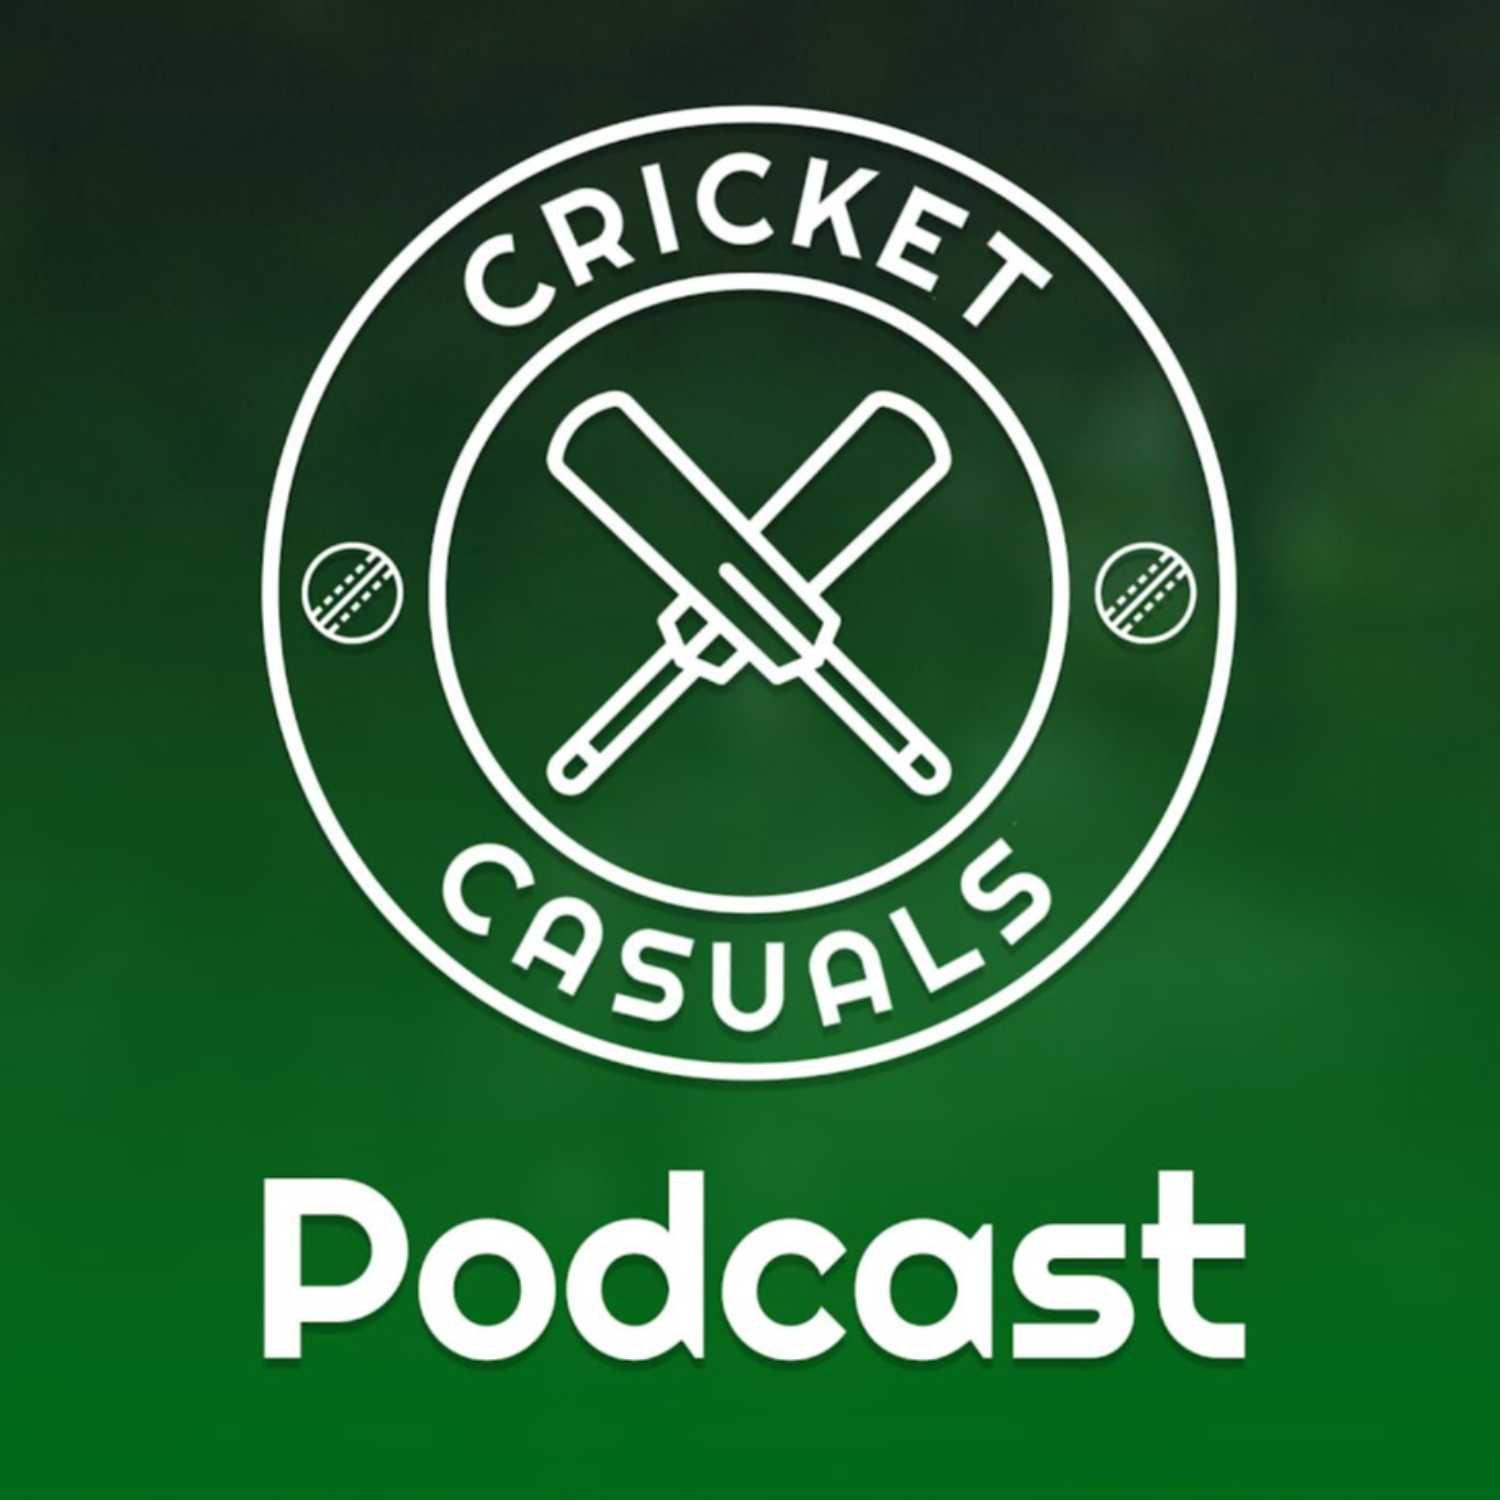 The (January) Christmas Episode with Dan from OURcricket | s2 e3